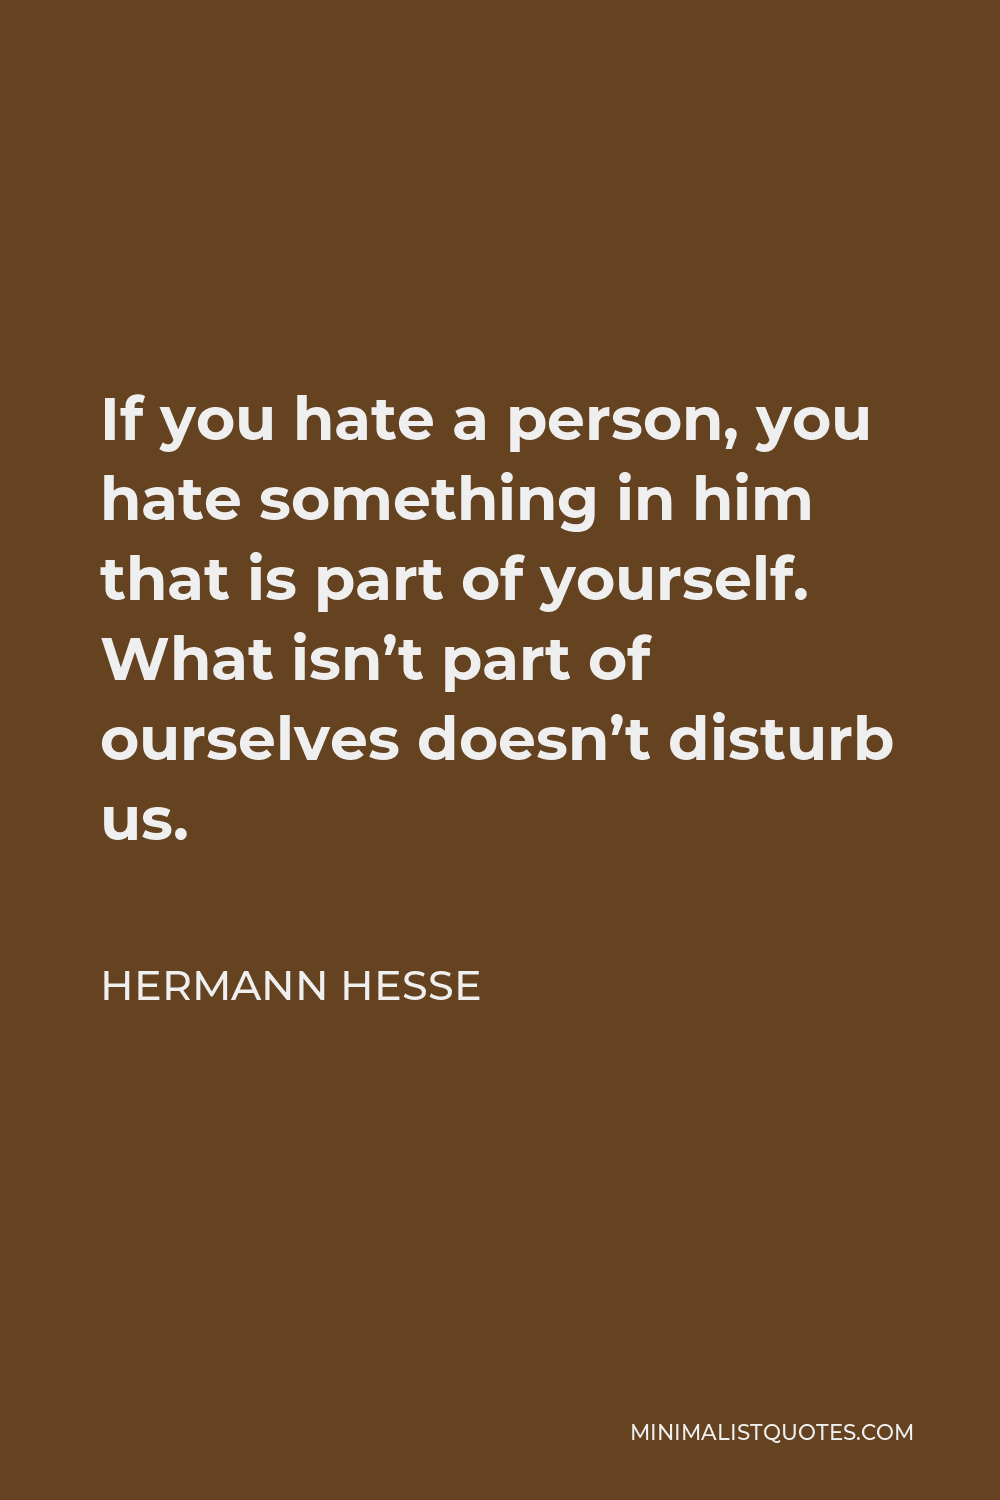 Hermann Hesse Quote - If you hate a person, you hate something in him that is part of yourself. What isn’t part of ourselves doesn’t disturb us.